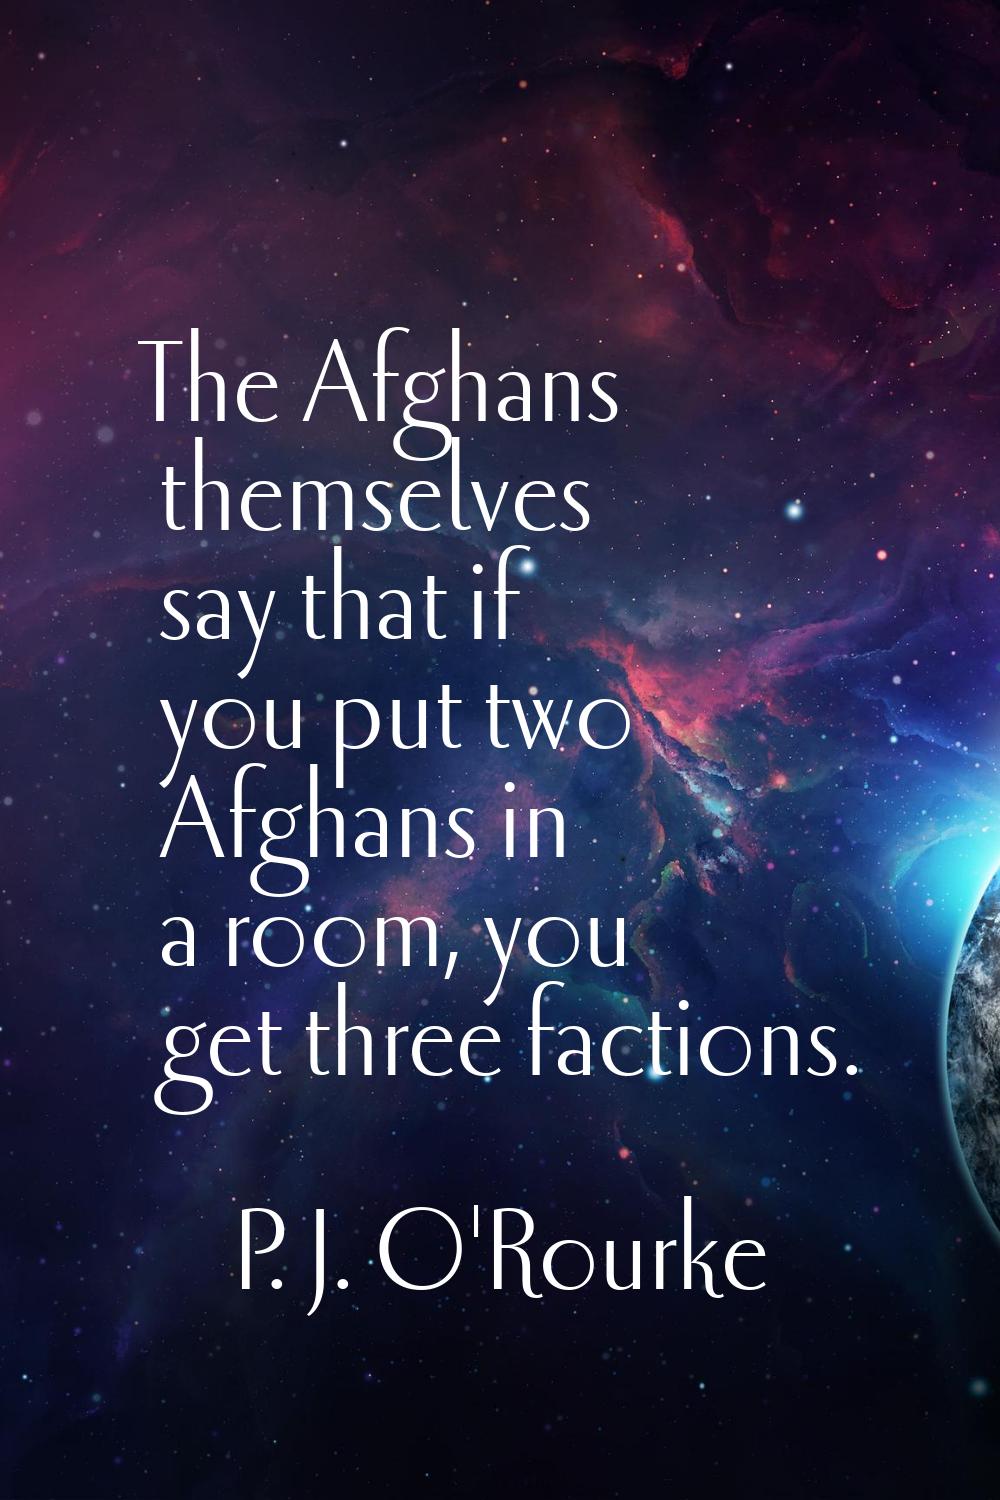 The Afghans themselves say that if you put two Afghans in a room, you get three factions.